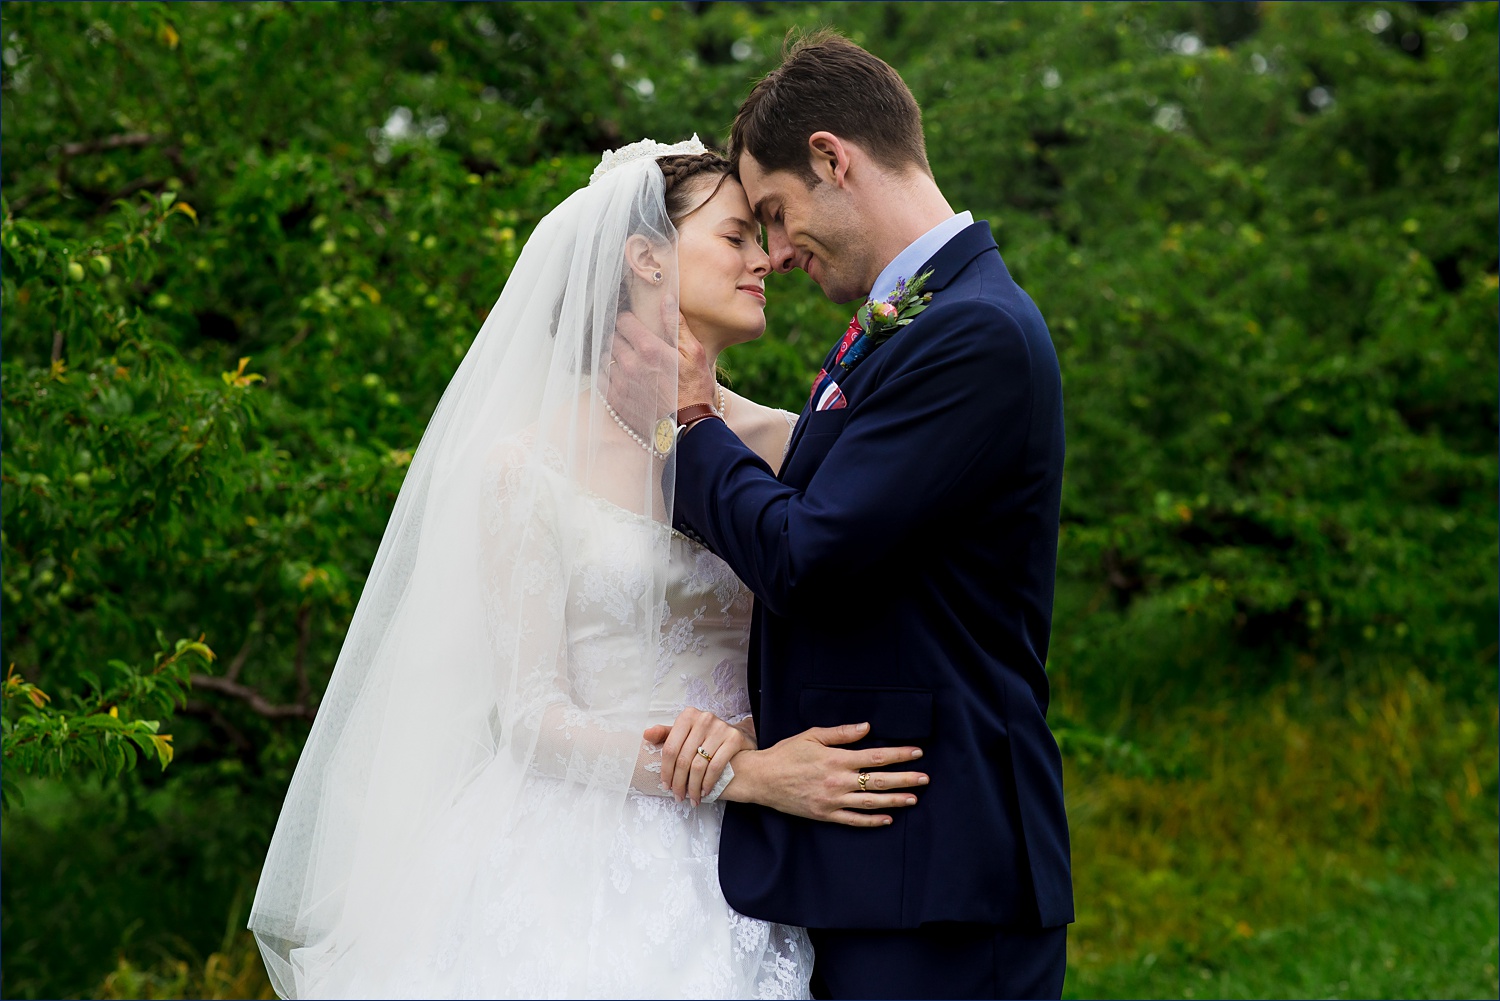 The newlyweds get in close for a loving embrace on their White Mountain NH wedding day